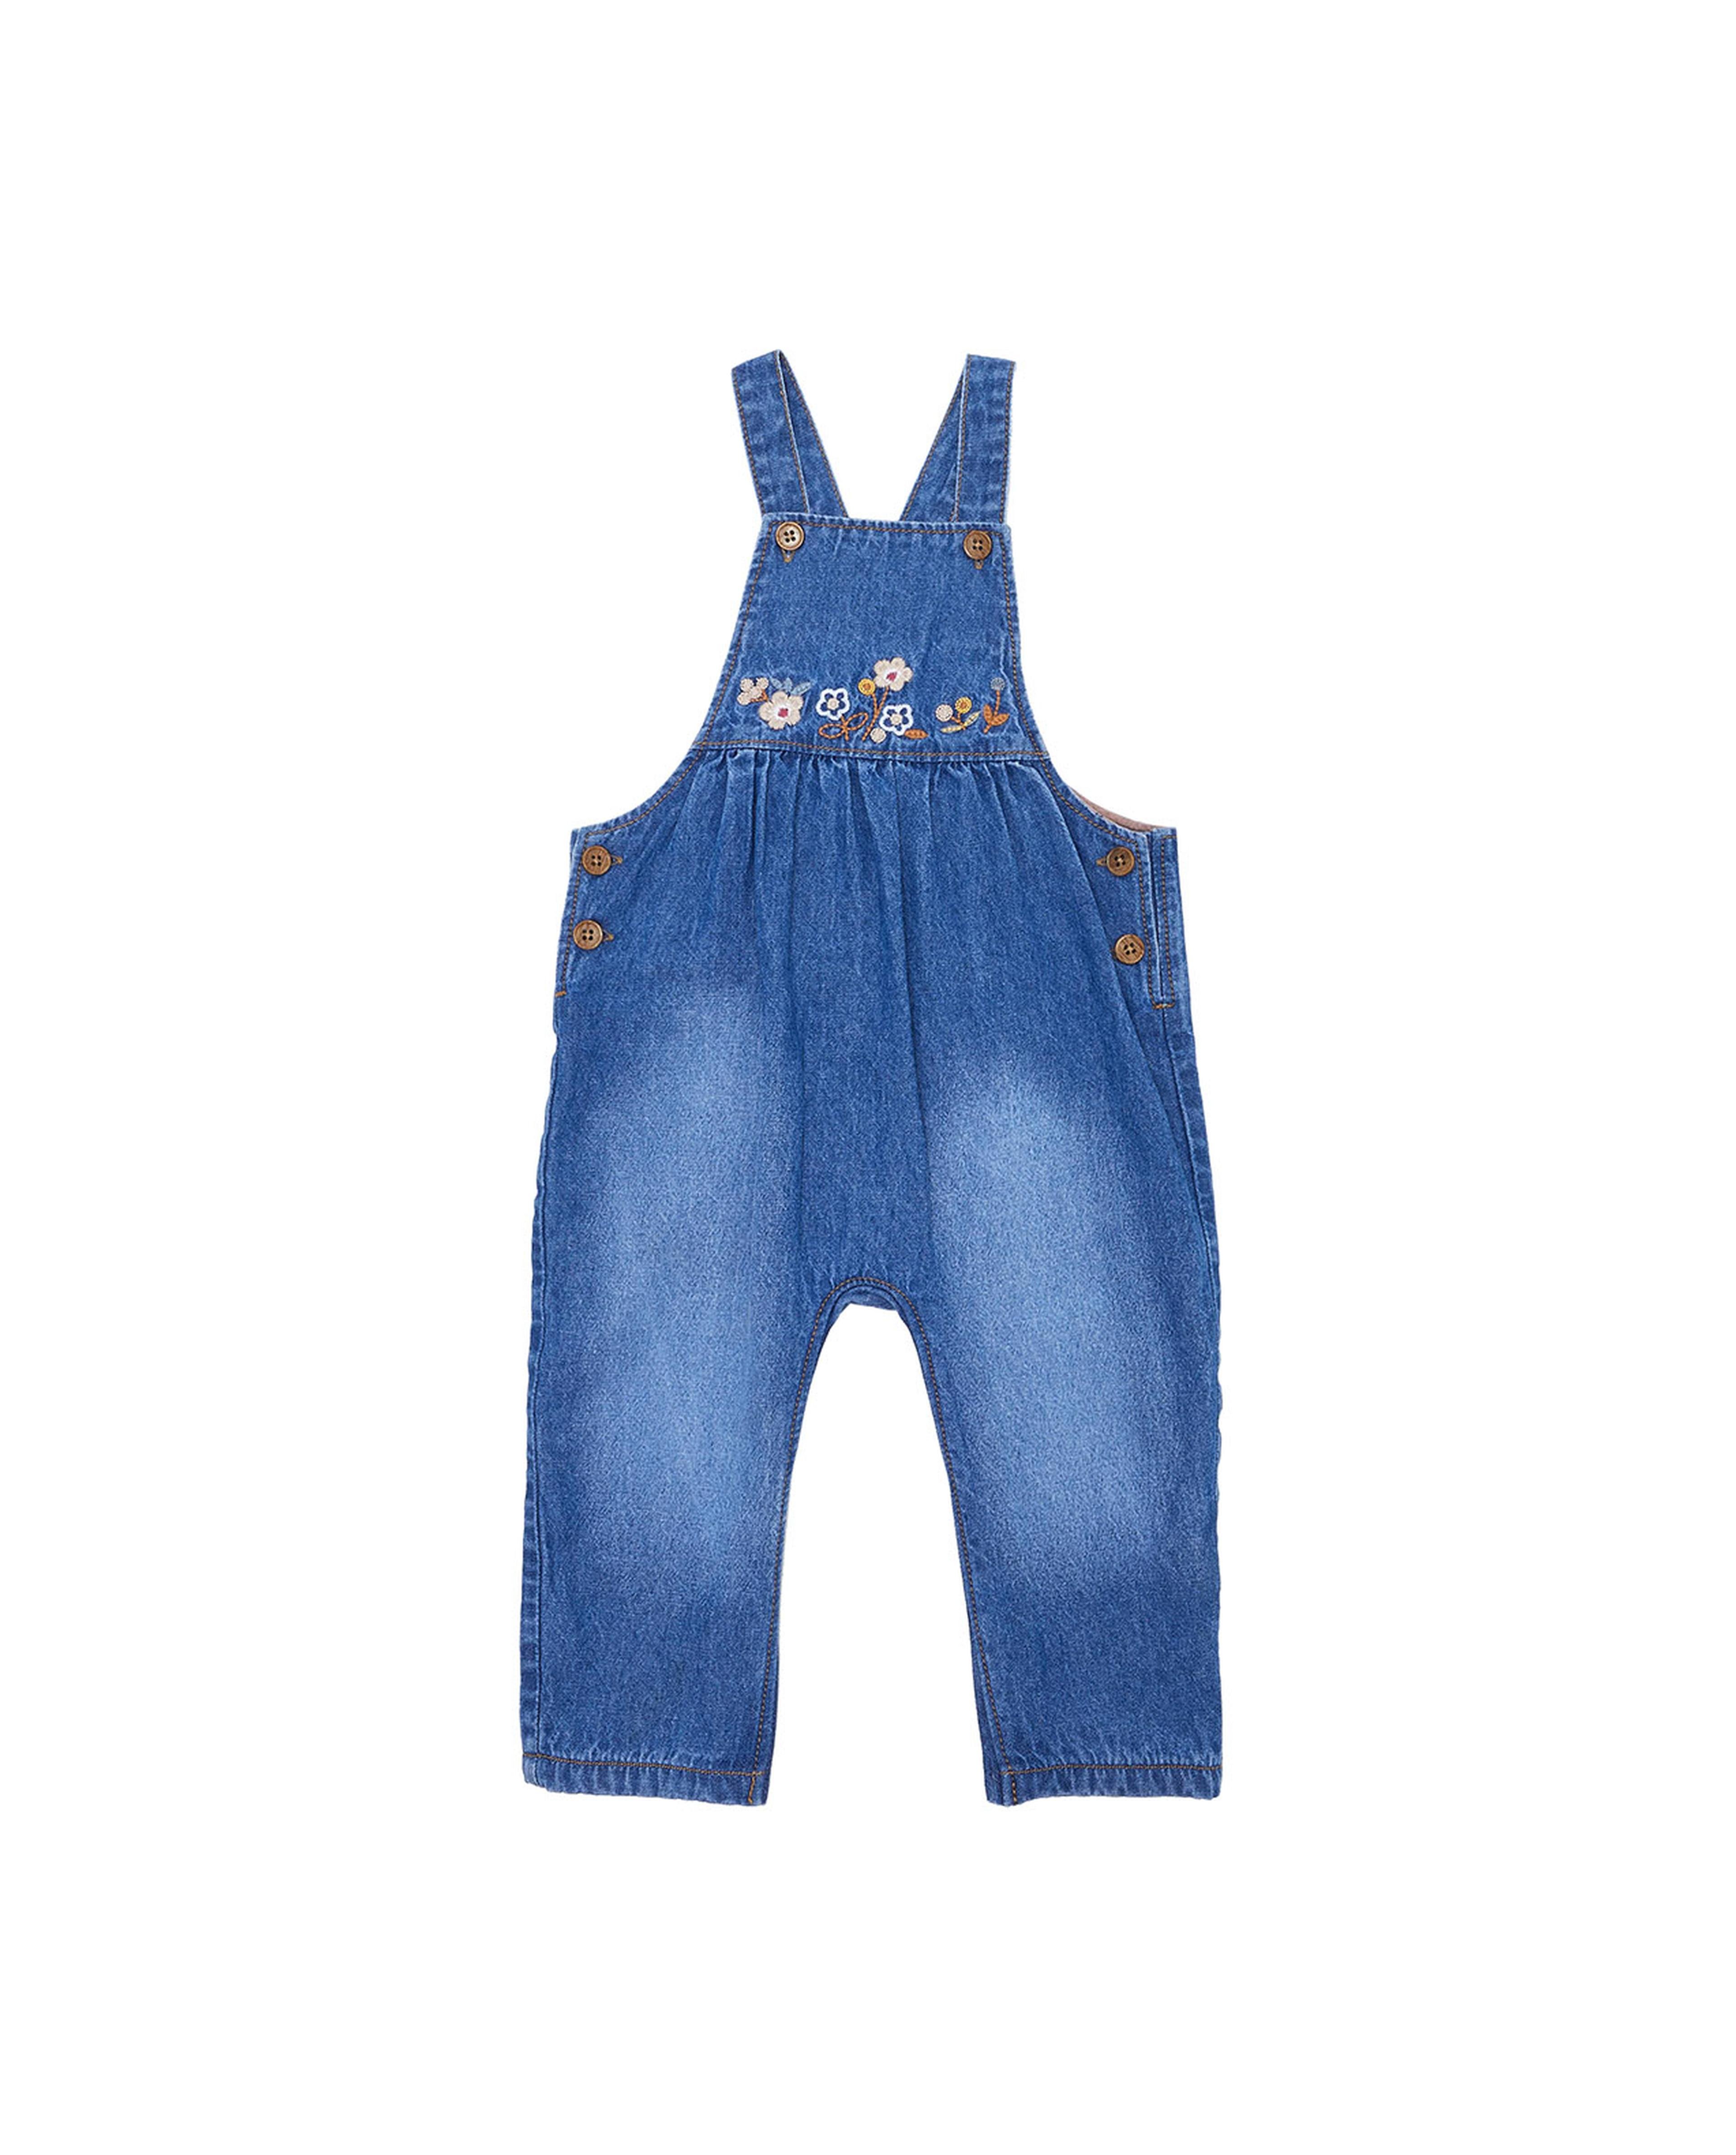 Polka Dots Top and Embroidered Denim Overalls